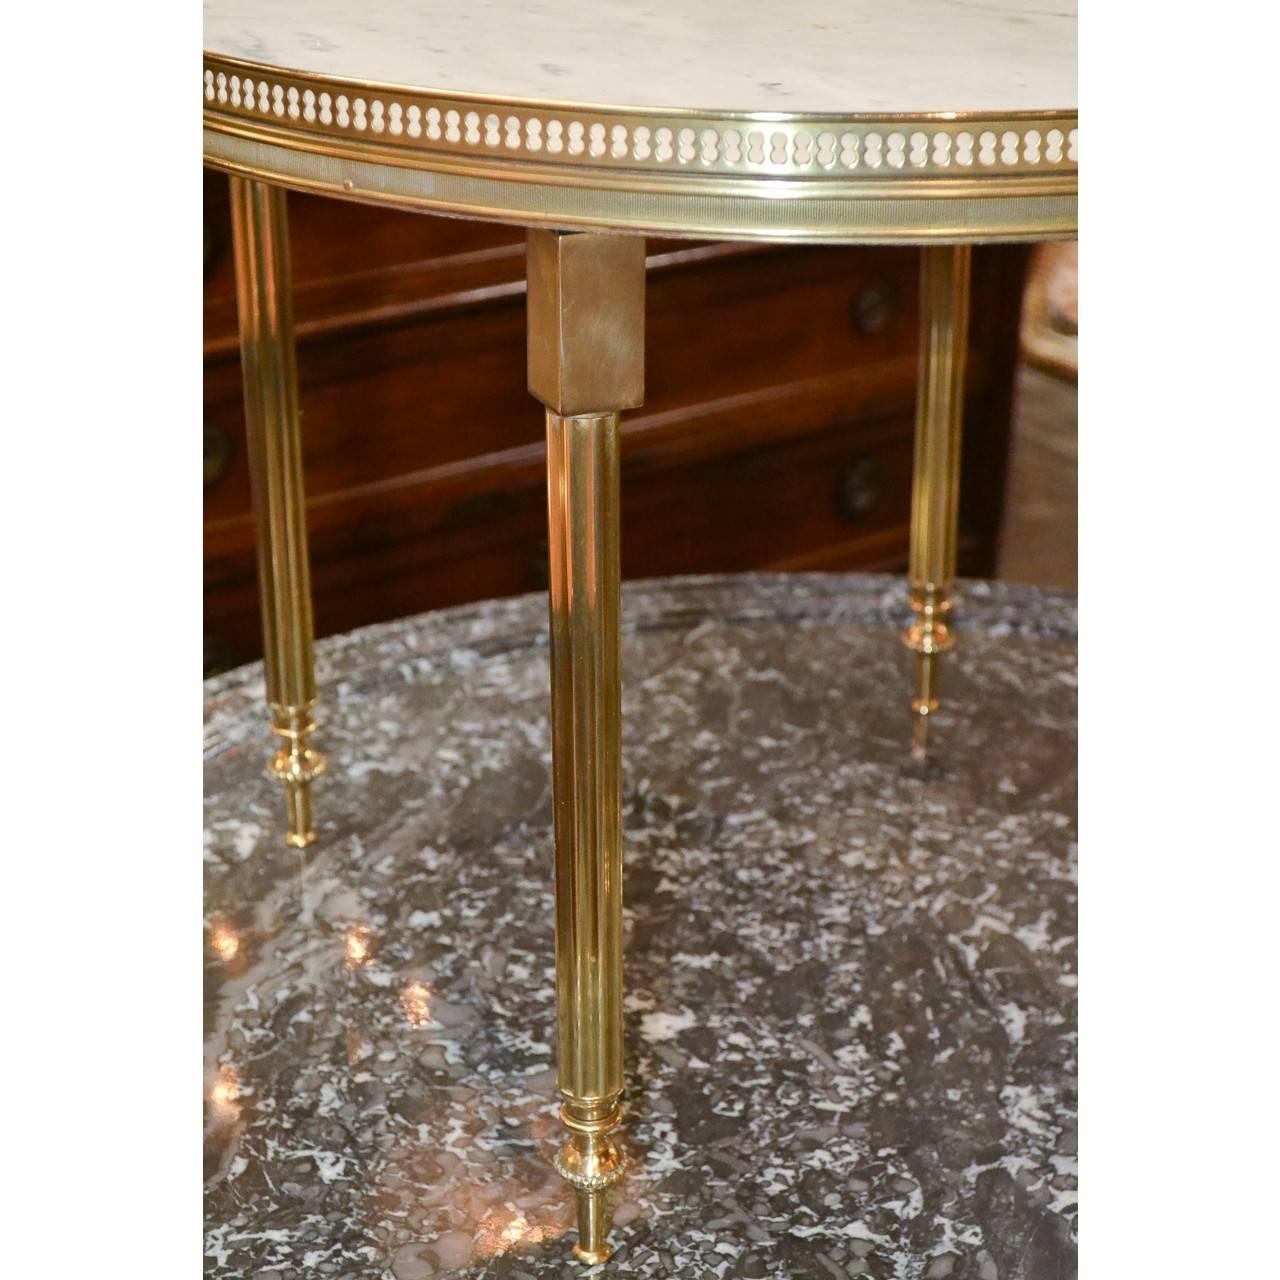 Brass side table with Carrara marble top, circa 1950.

Measure: 24 inches diameter x 17.5 inches height.